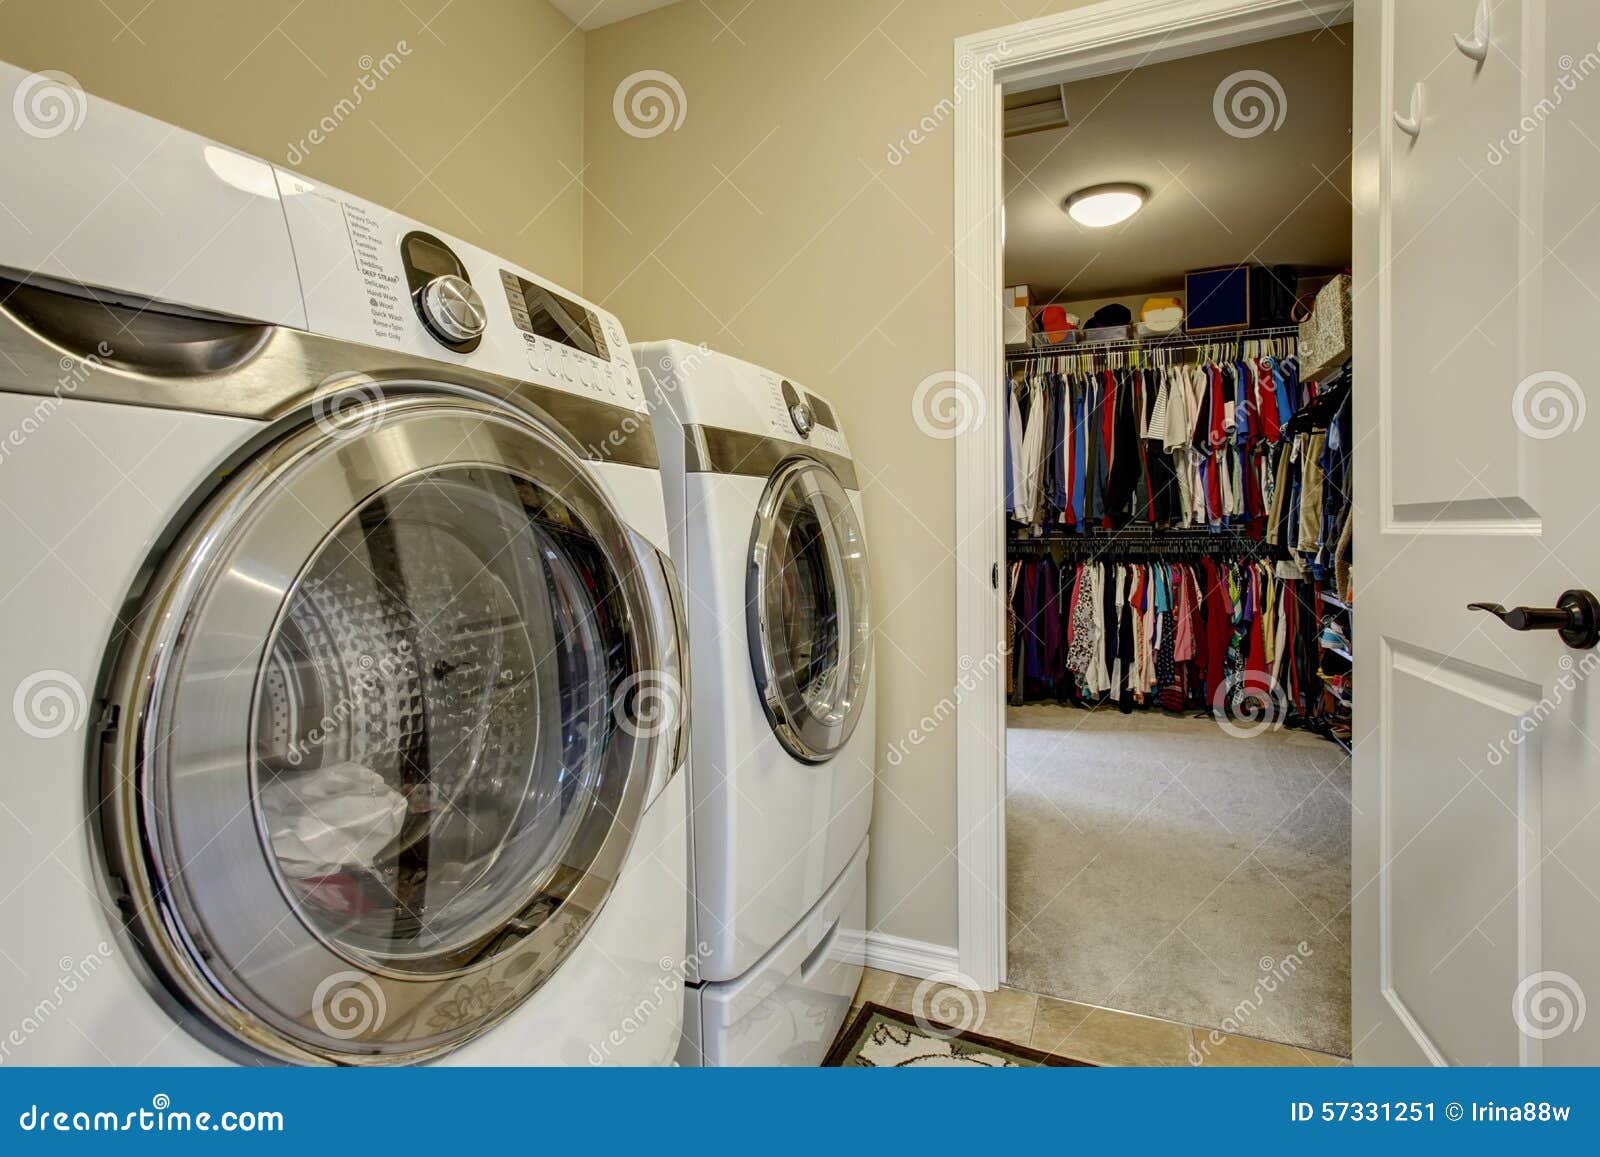 excellent laundry room with washer and dryer.